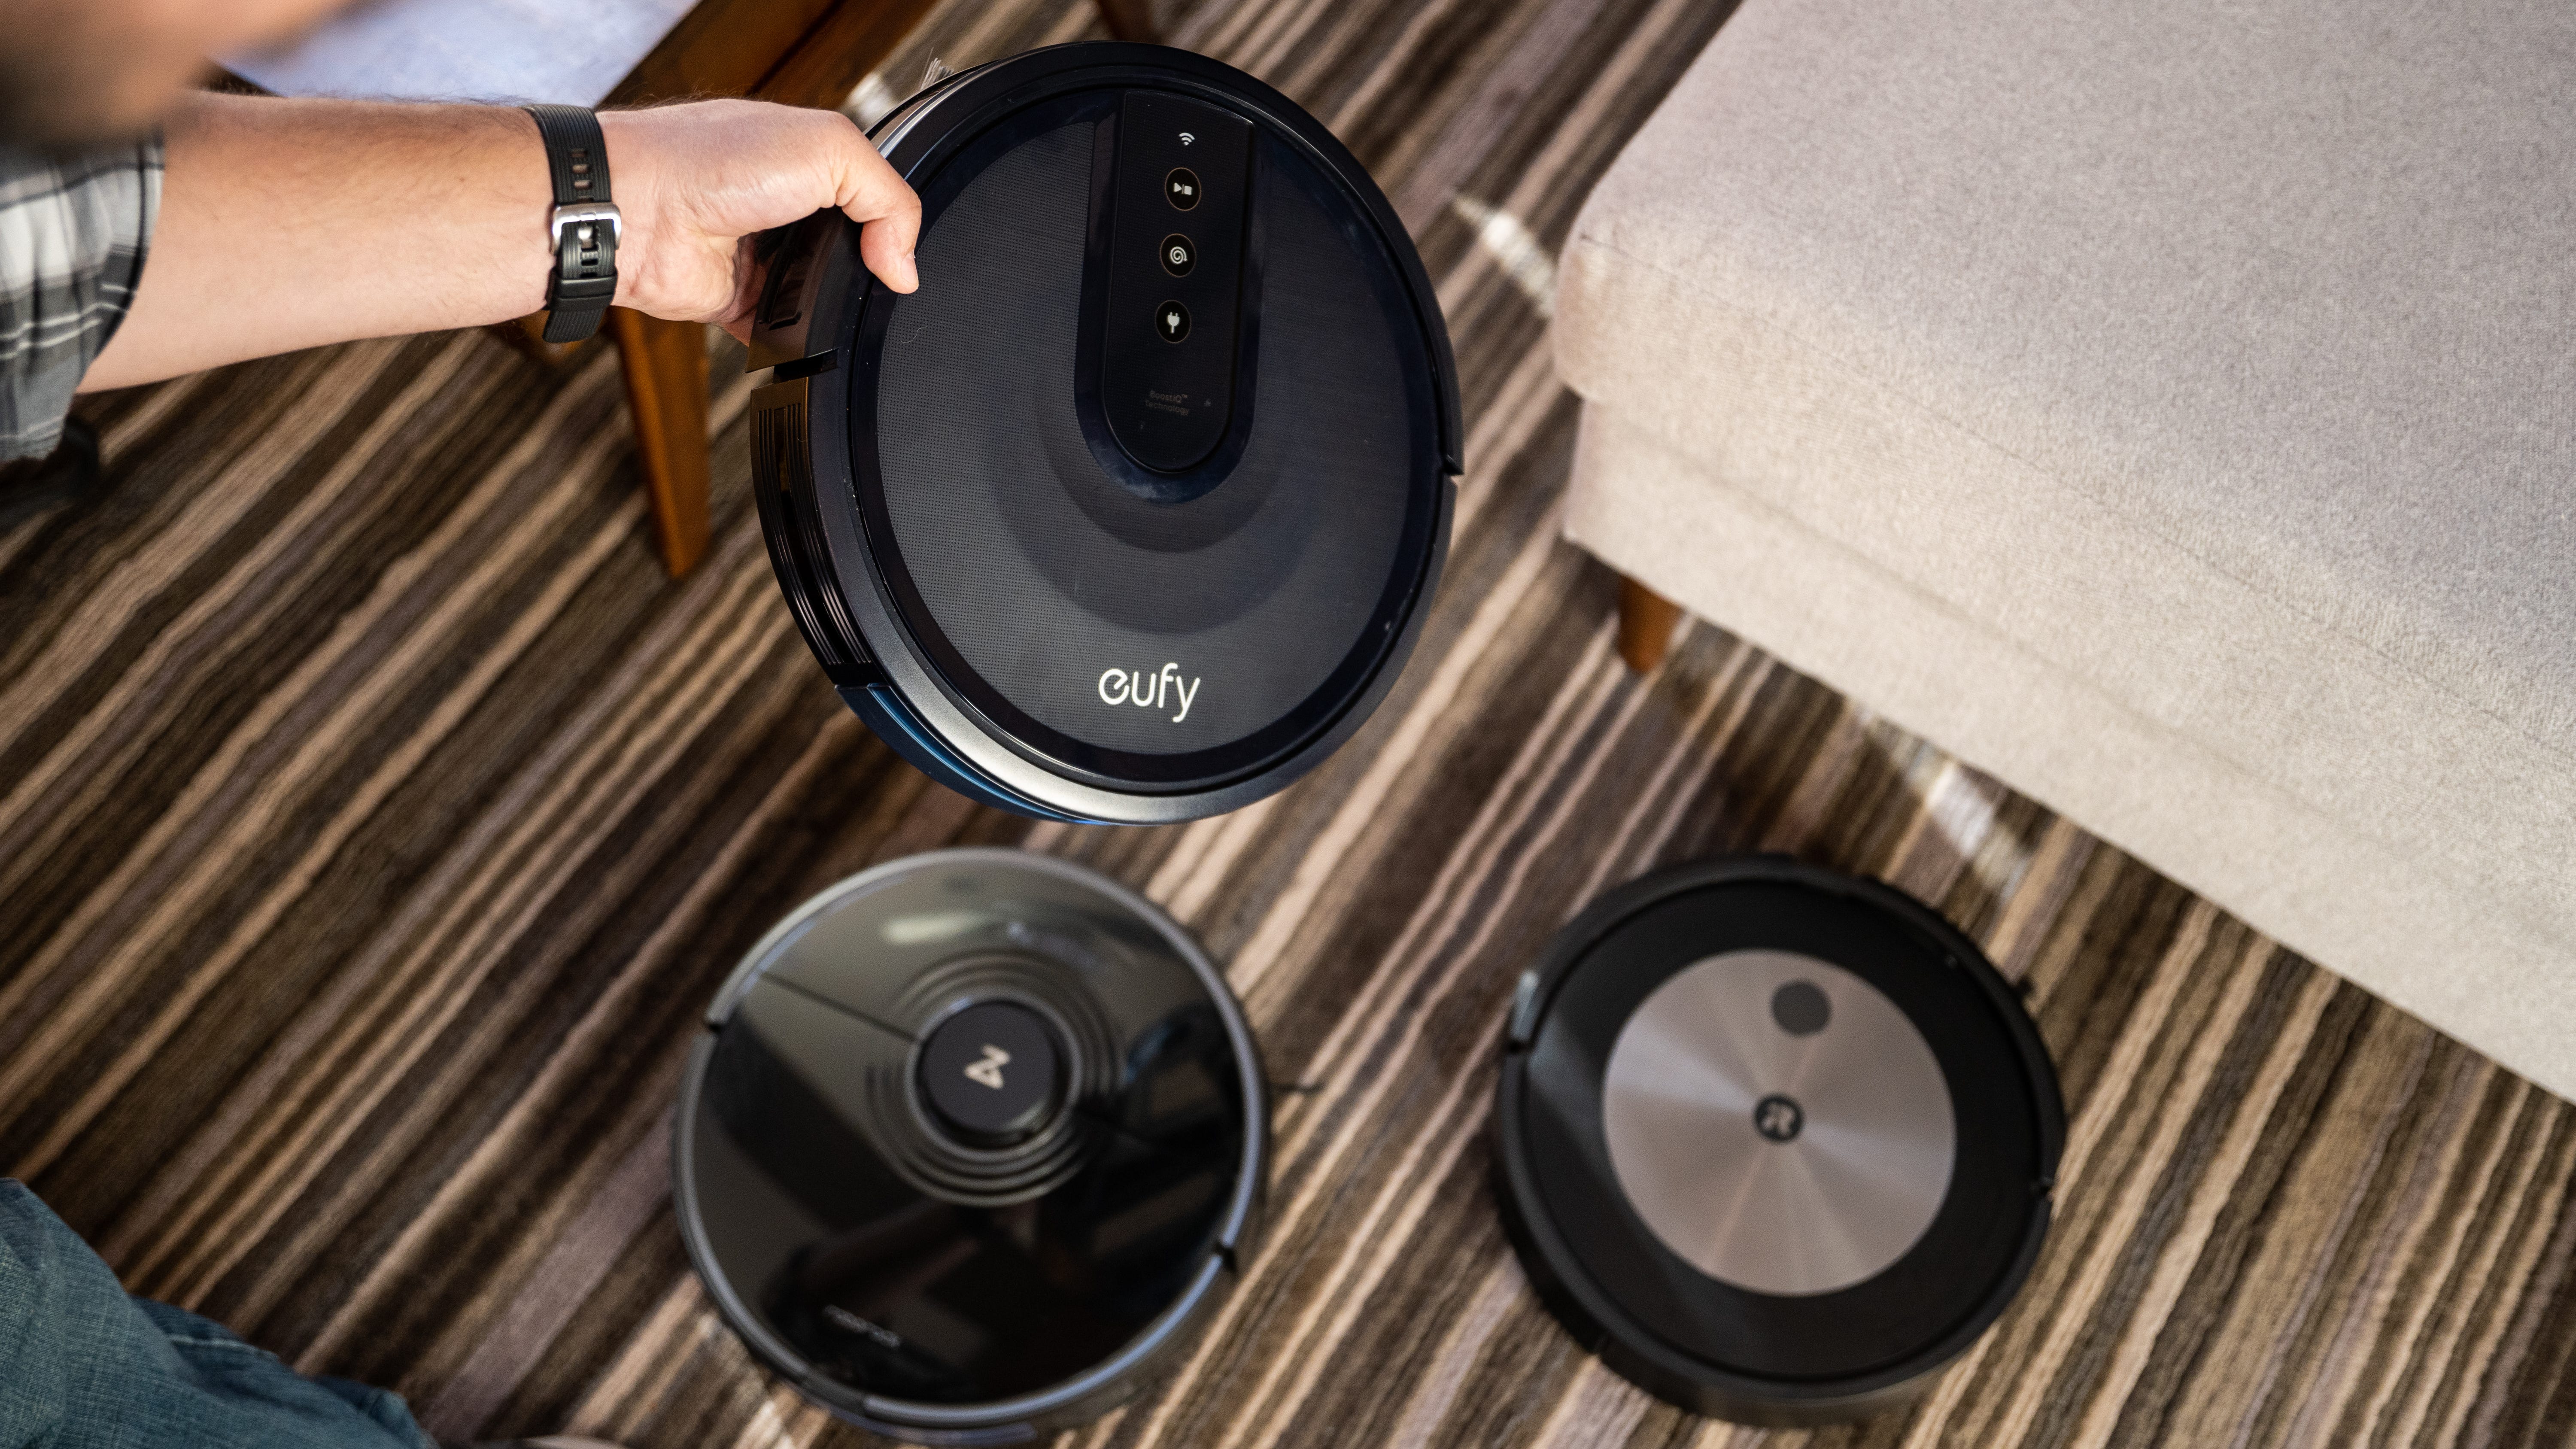 Keep Your Floors Clean With $200 Off the Roborock Q5 Plus Robot Vacuum -  CNET